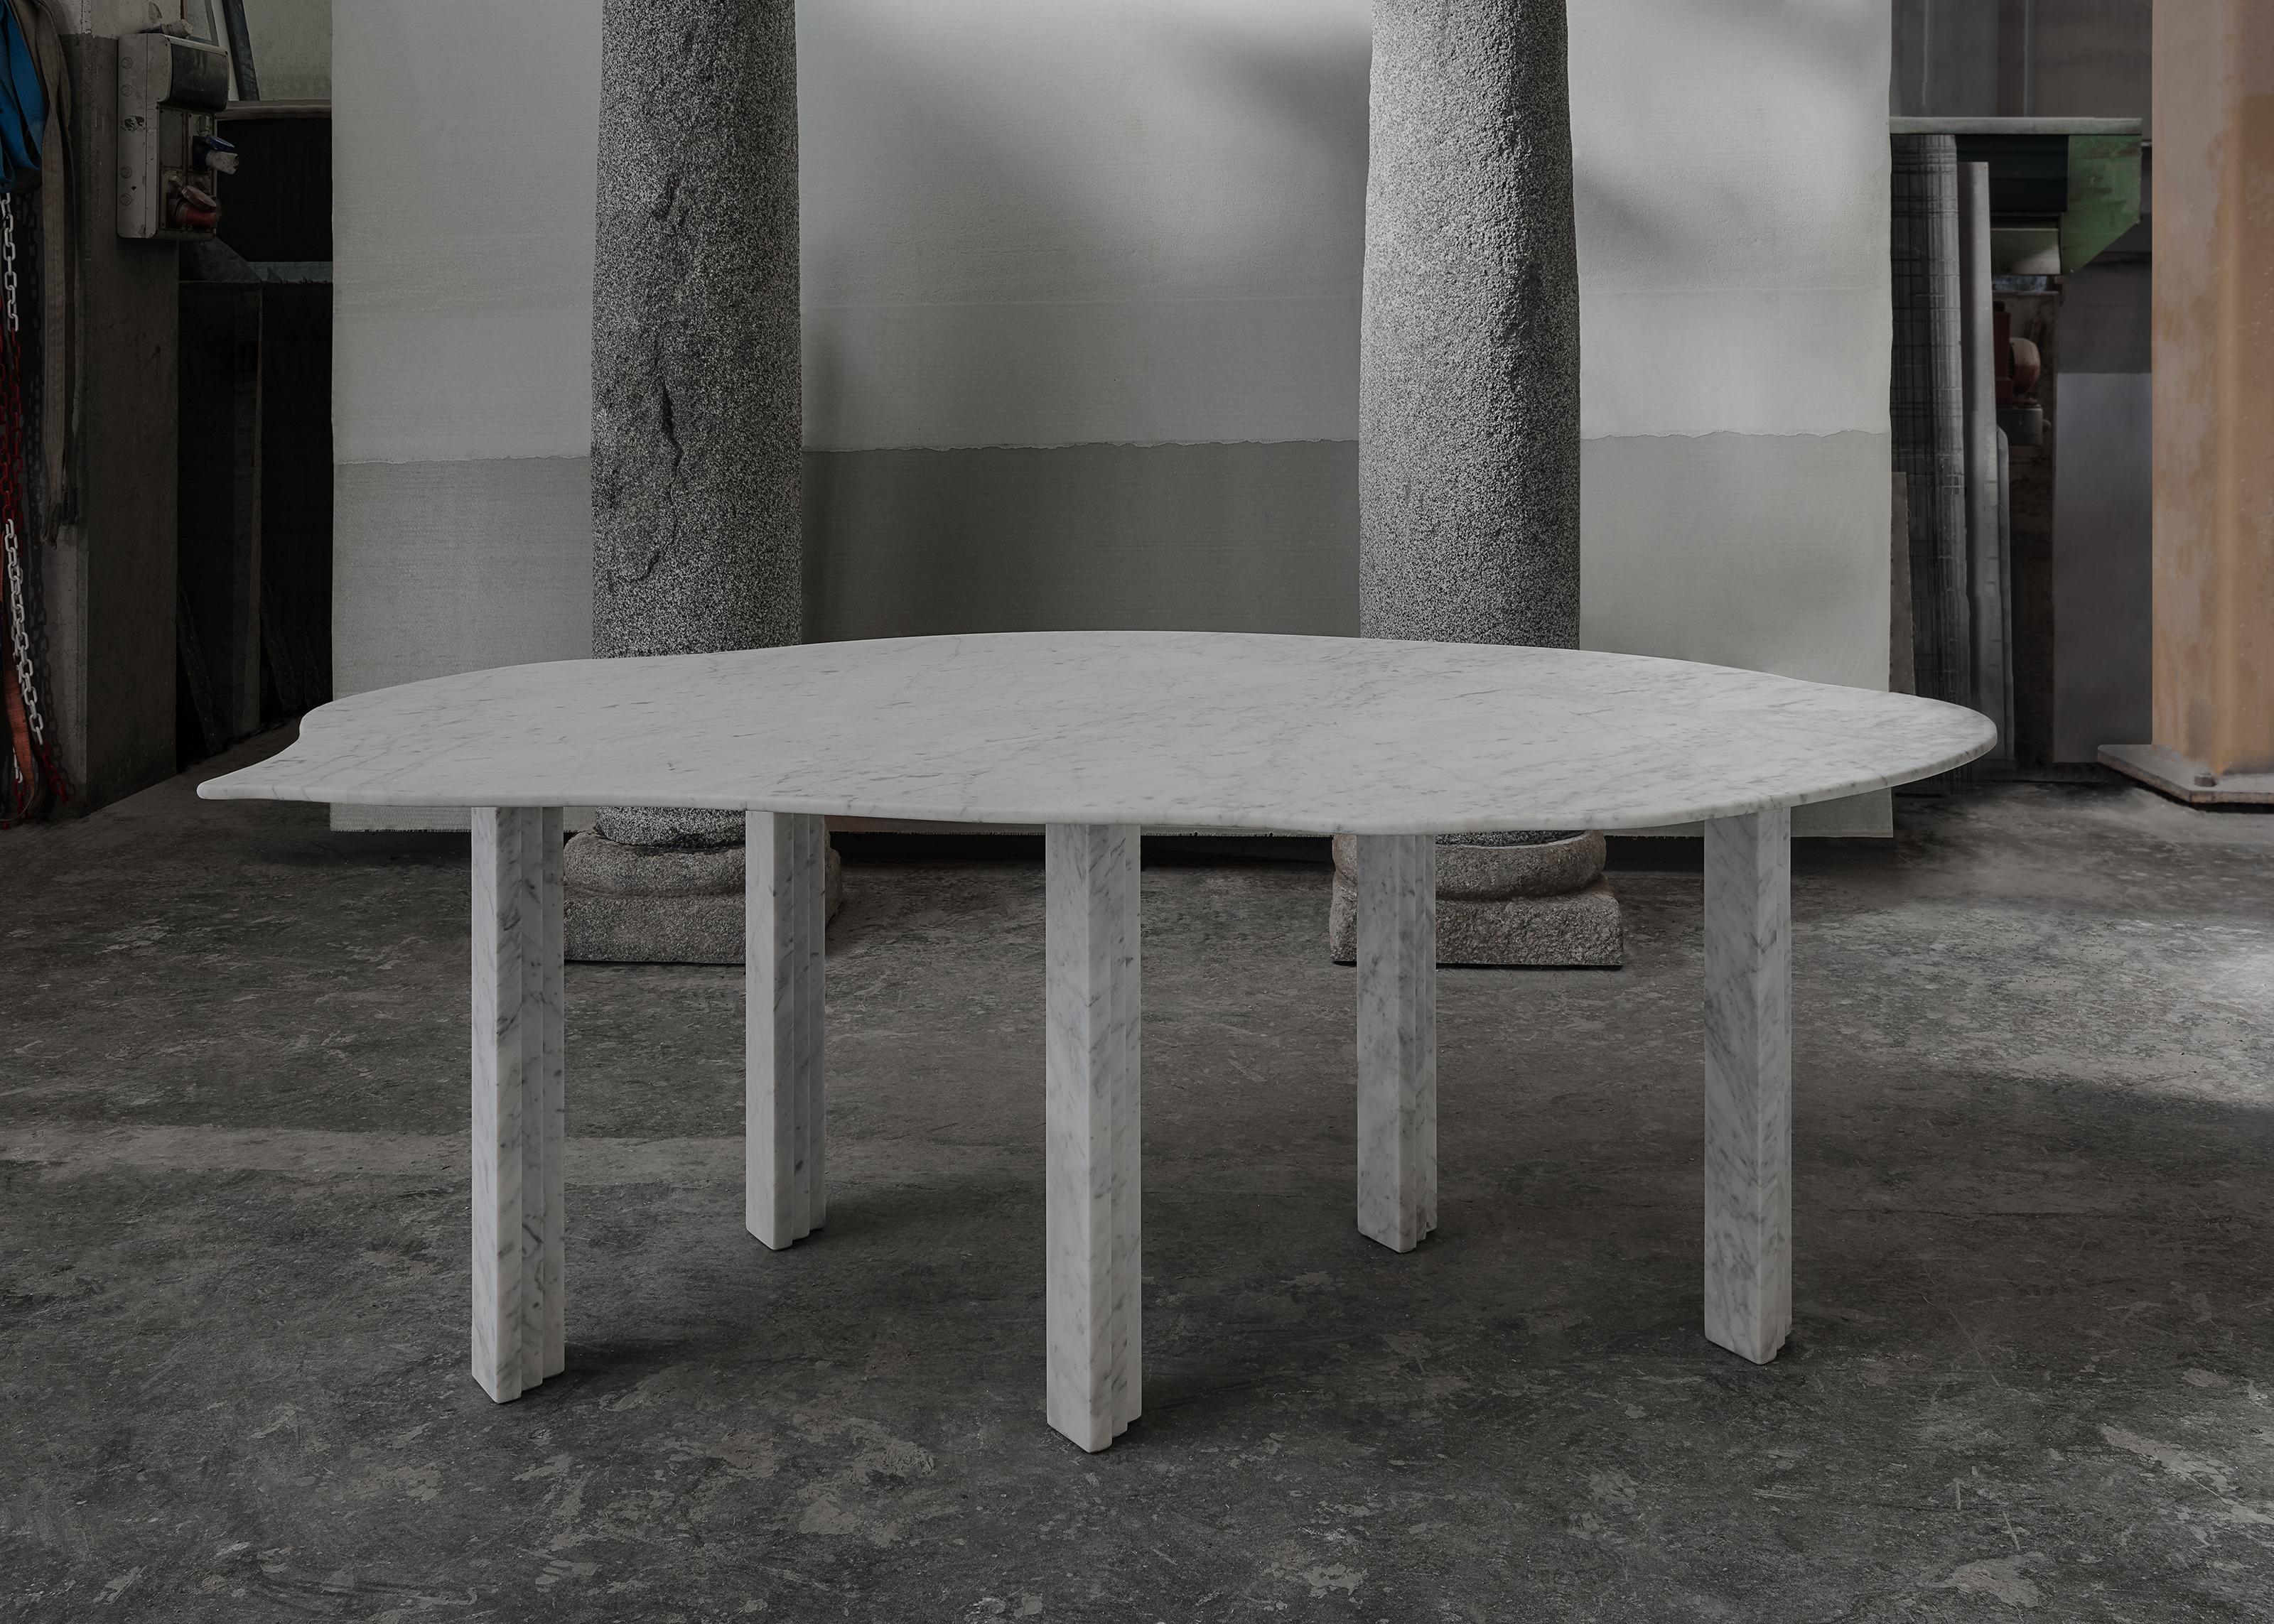 Sculptural white marble table - Lorenzo Bini

Title: Cyclamen

Measures: 
- Dining table 190 x 115 x H 73,5 cm
- Coffee table 95 x 63 x H 37 cm

Material: bianco Carrara


Six Tableaux is a series of marble tables designed by Lorenzo Bini